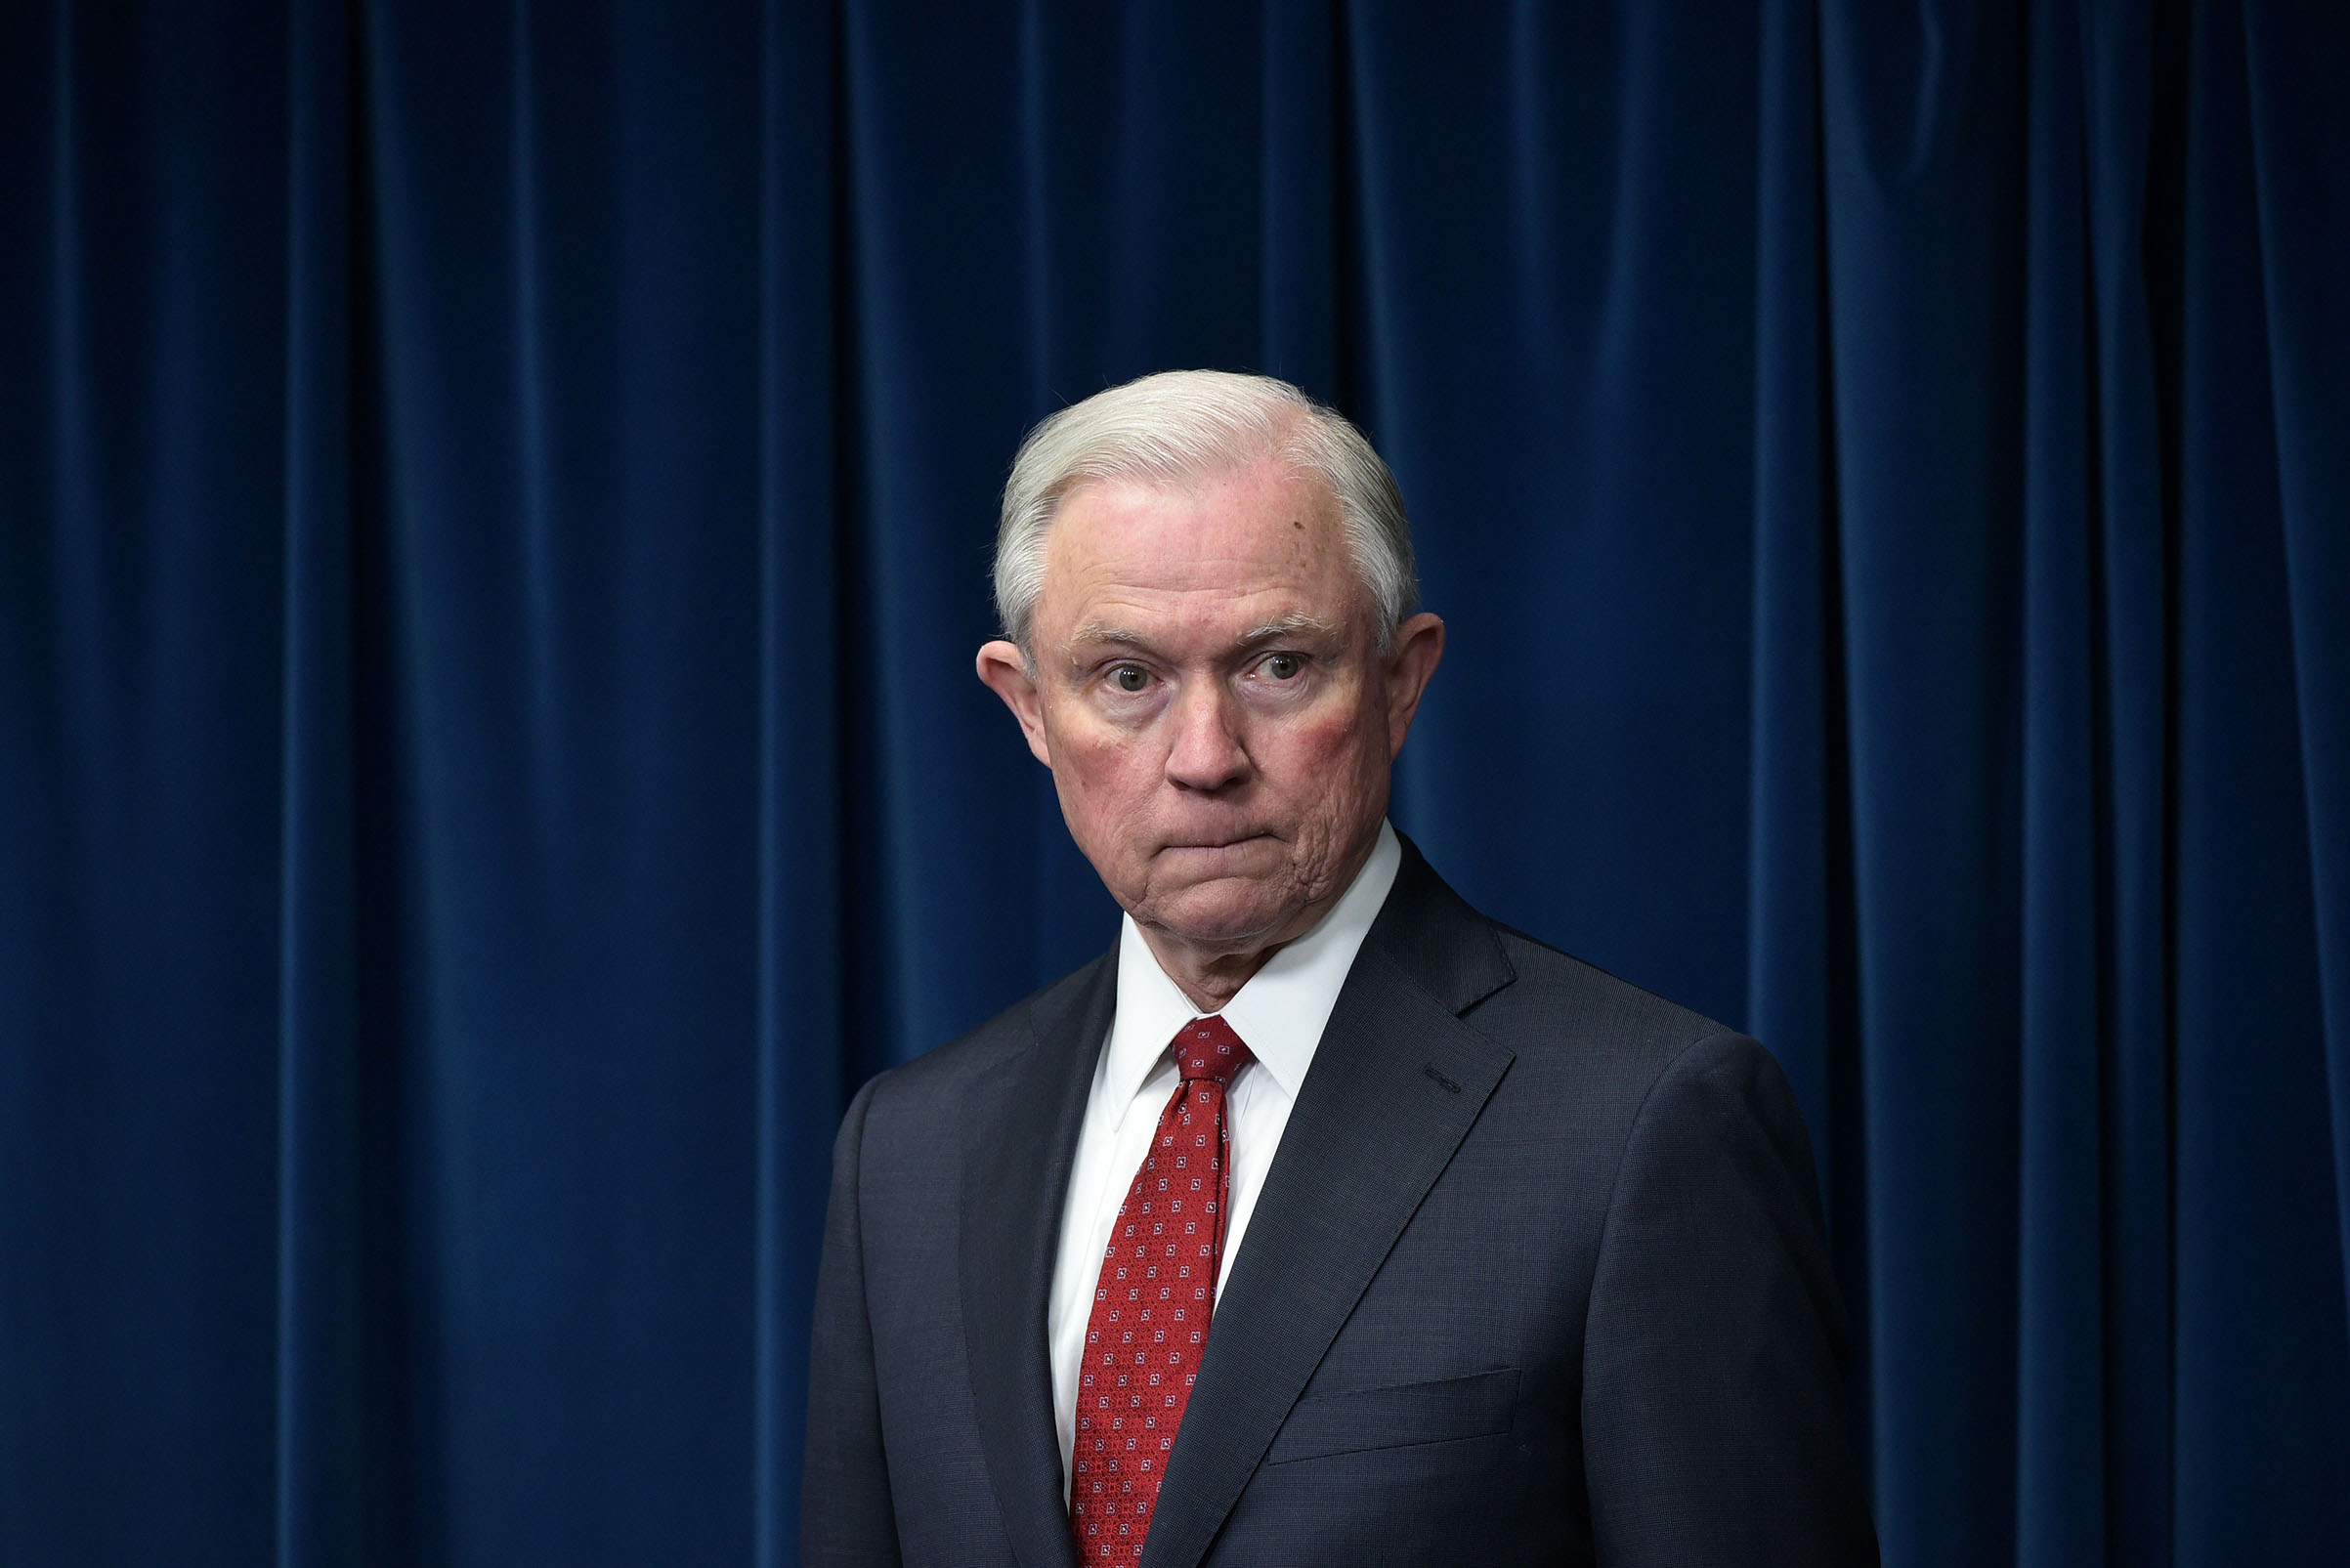 Attorney General Jeff Sessions waits for his turn to speak at the US Customs and Border Protection Press Room on March 6, 2017. (Mandel Ngan—AFP/Getty Images)